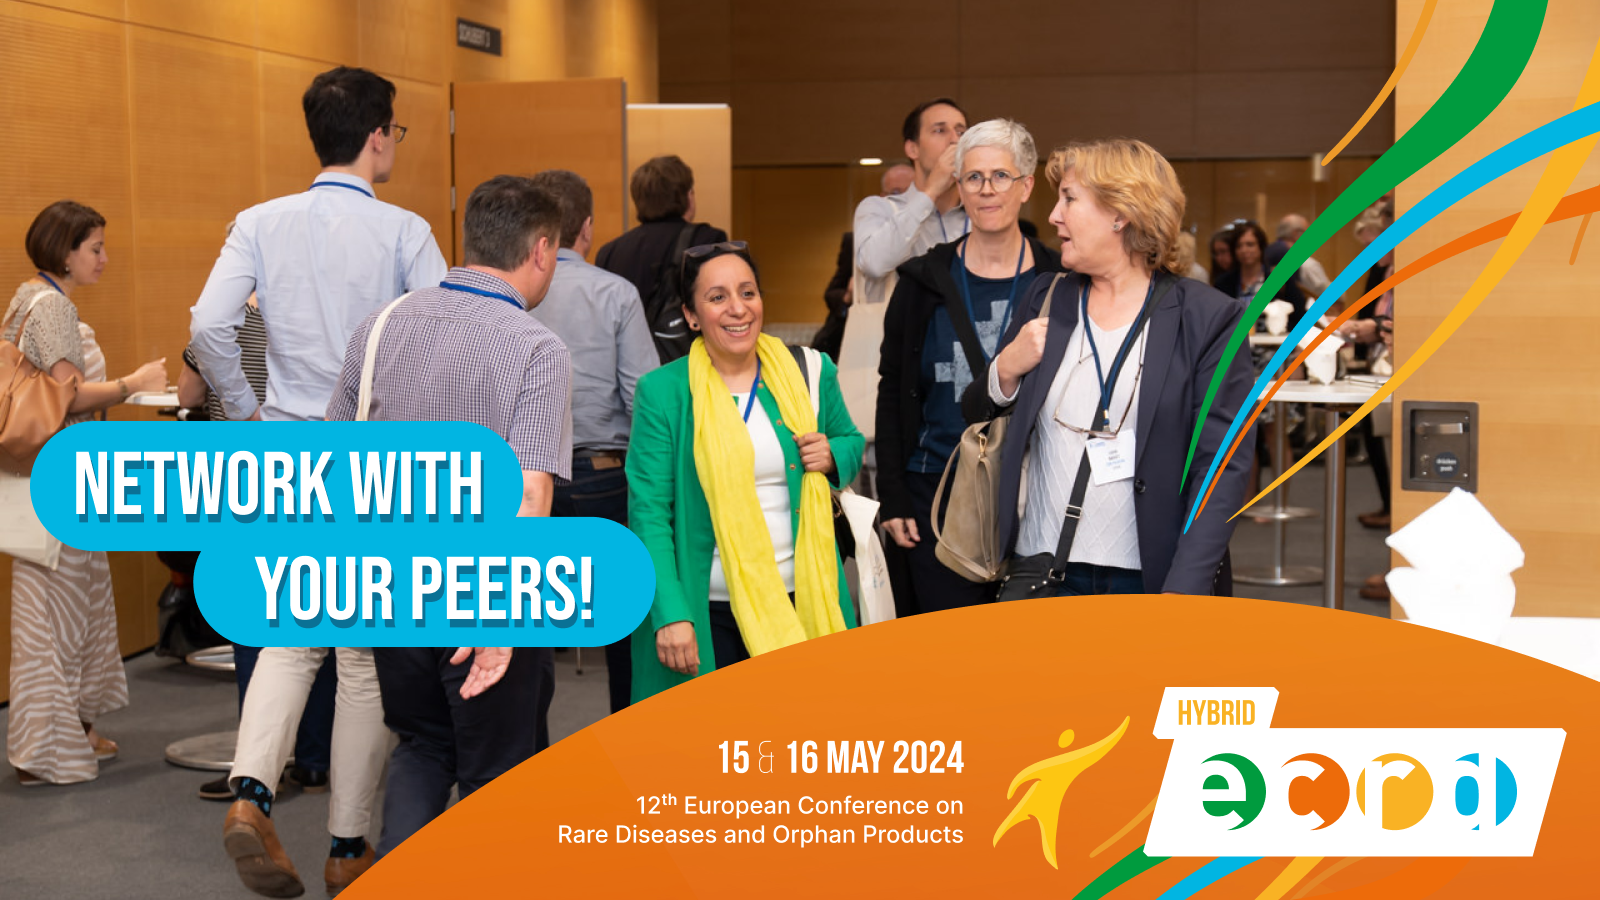 The 12th European Conference on Rare Diseases & Orphan Products